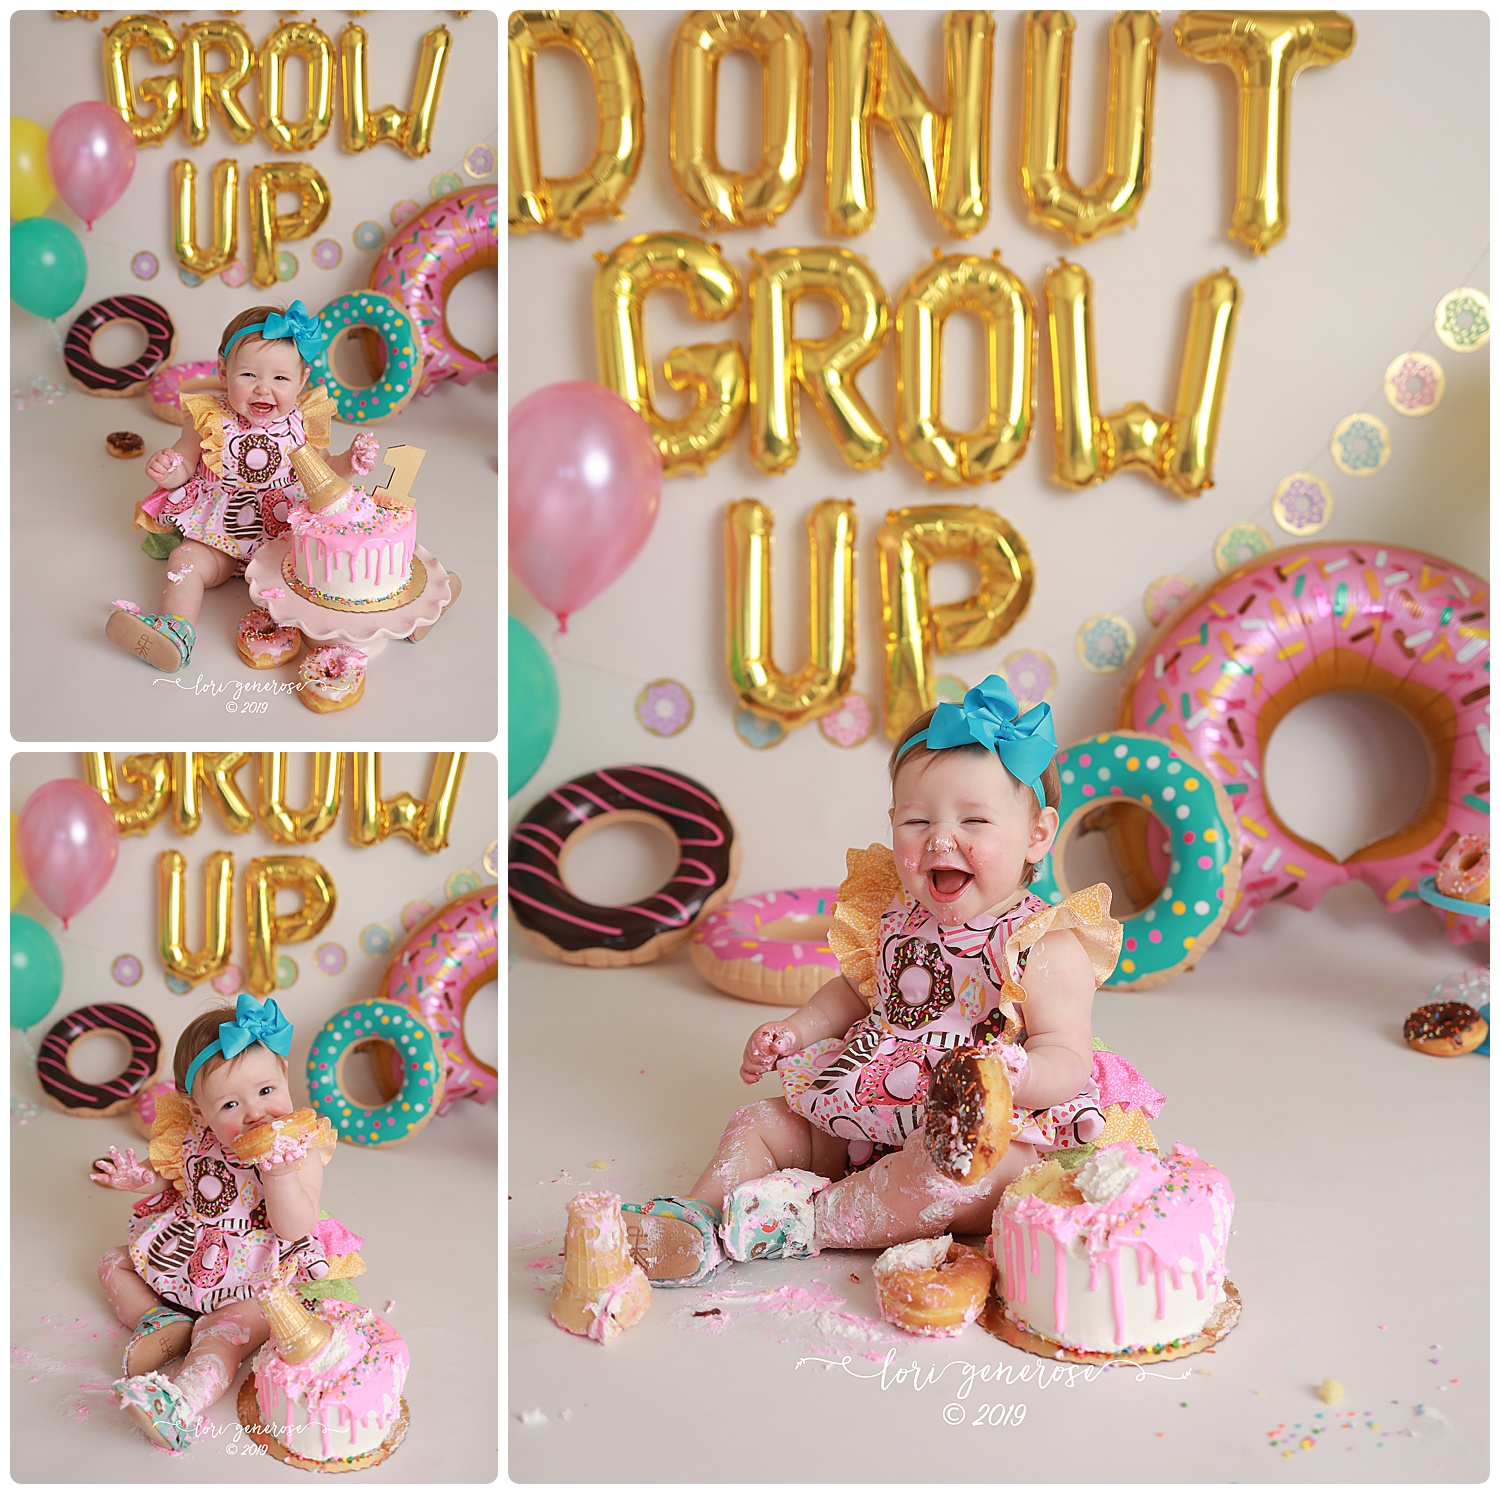 I don't know if I can handle this! Emma is absolutely amazing! Those Freshly Picked donut mocs are the icing on the cake... pun intended! Happy birthday sweet baby girl! 